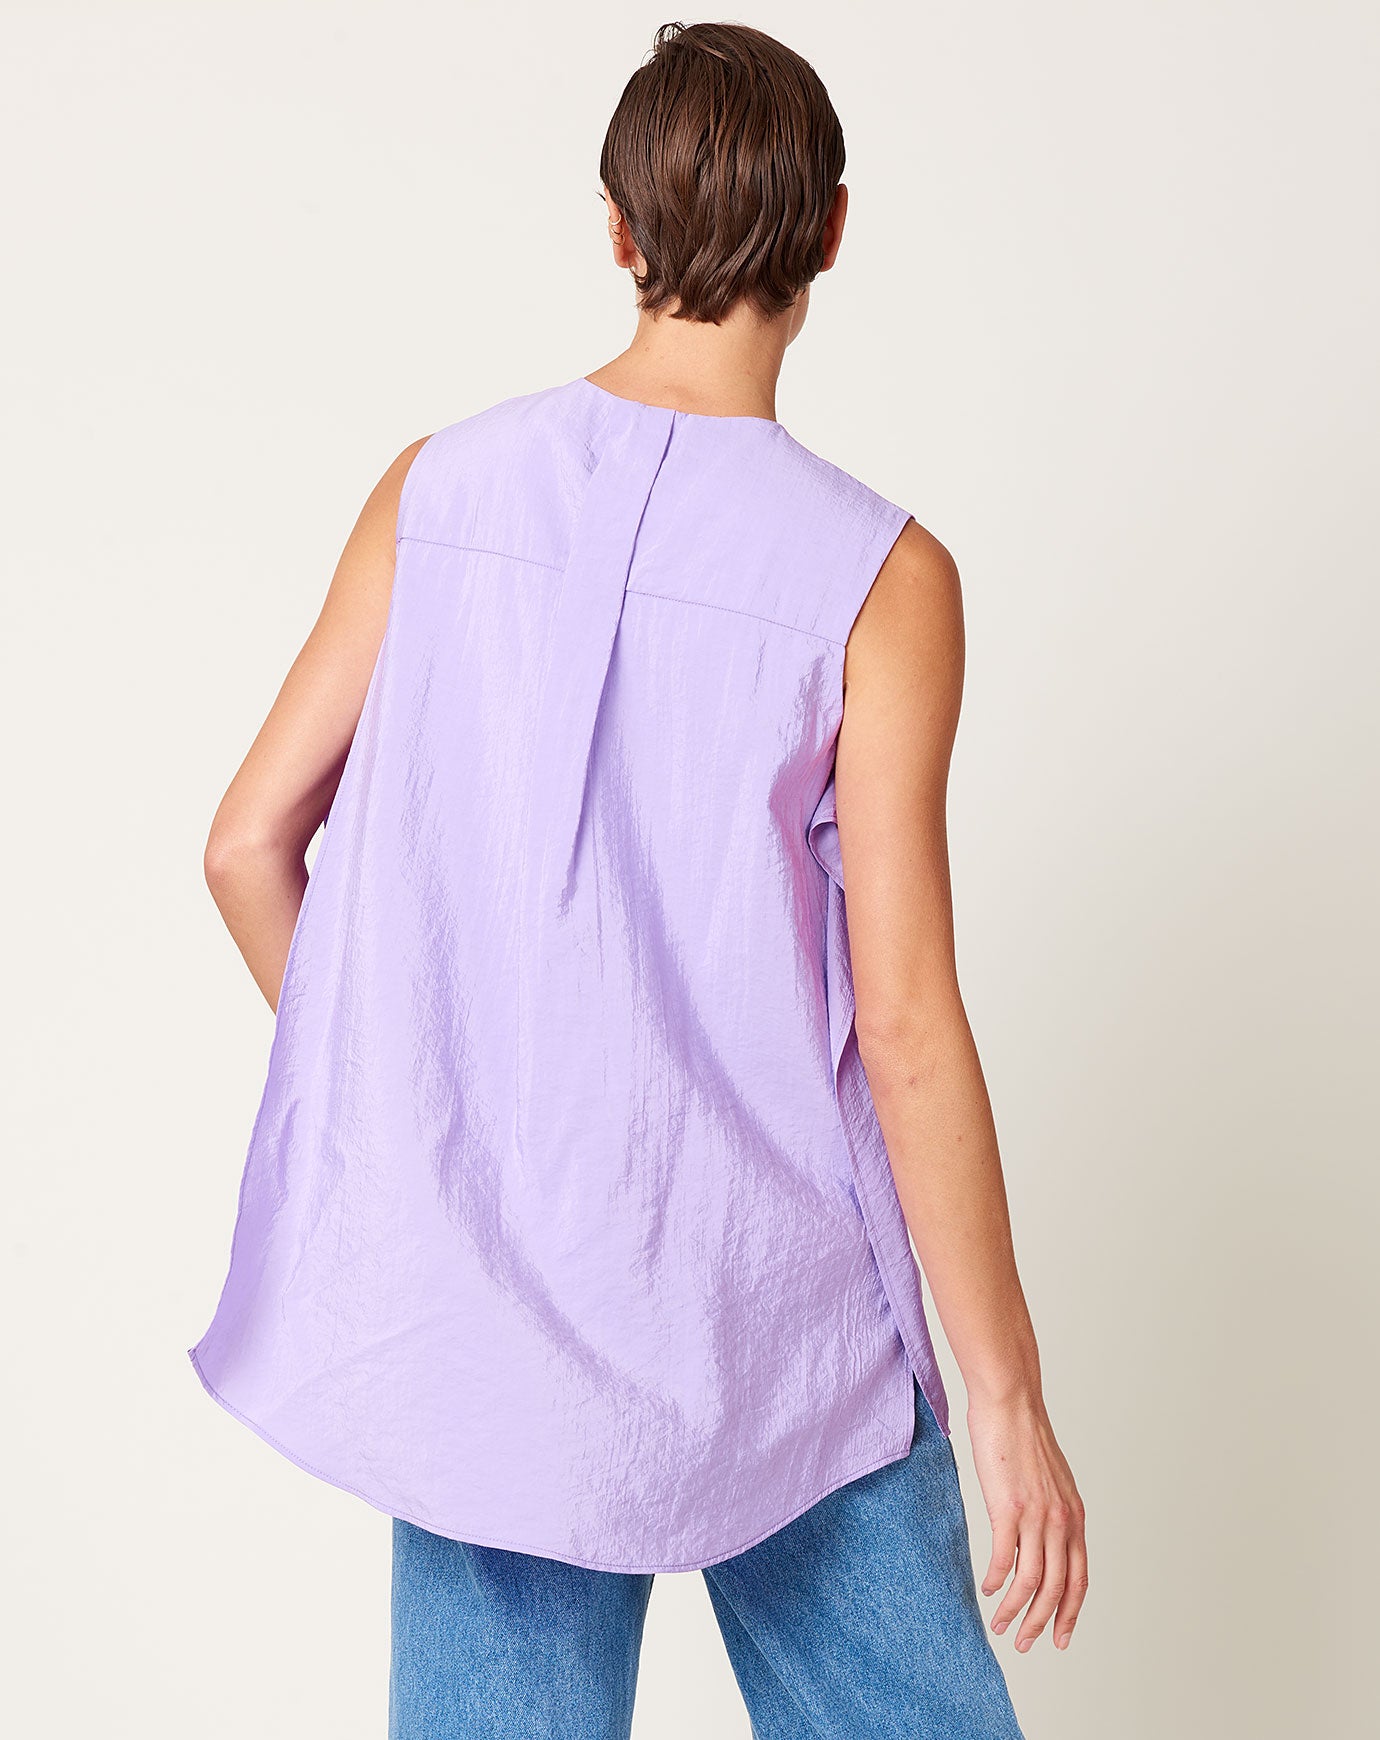 Christian Wijnants Thea Deconstructed Shirt in Violet